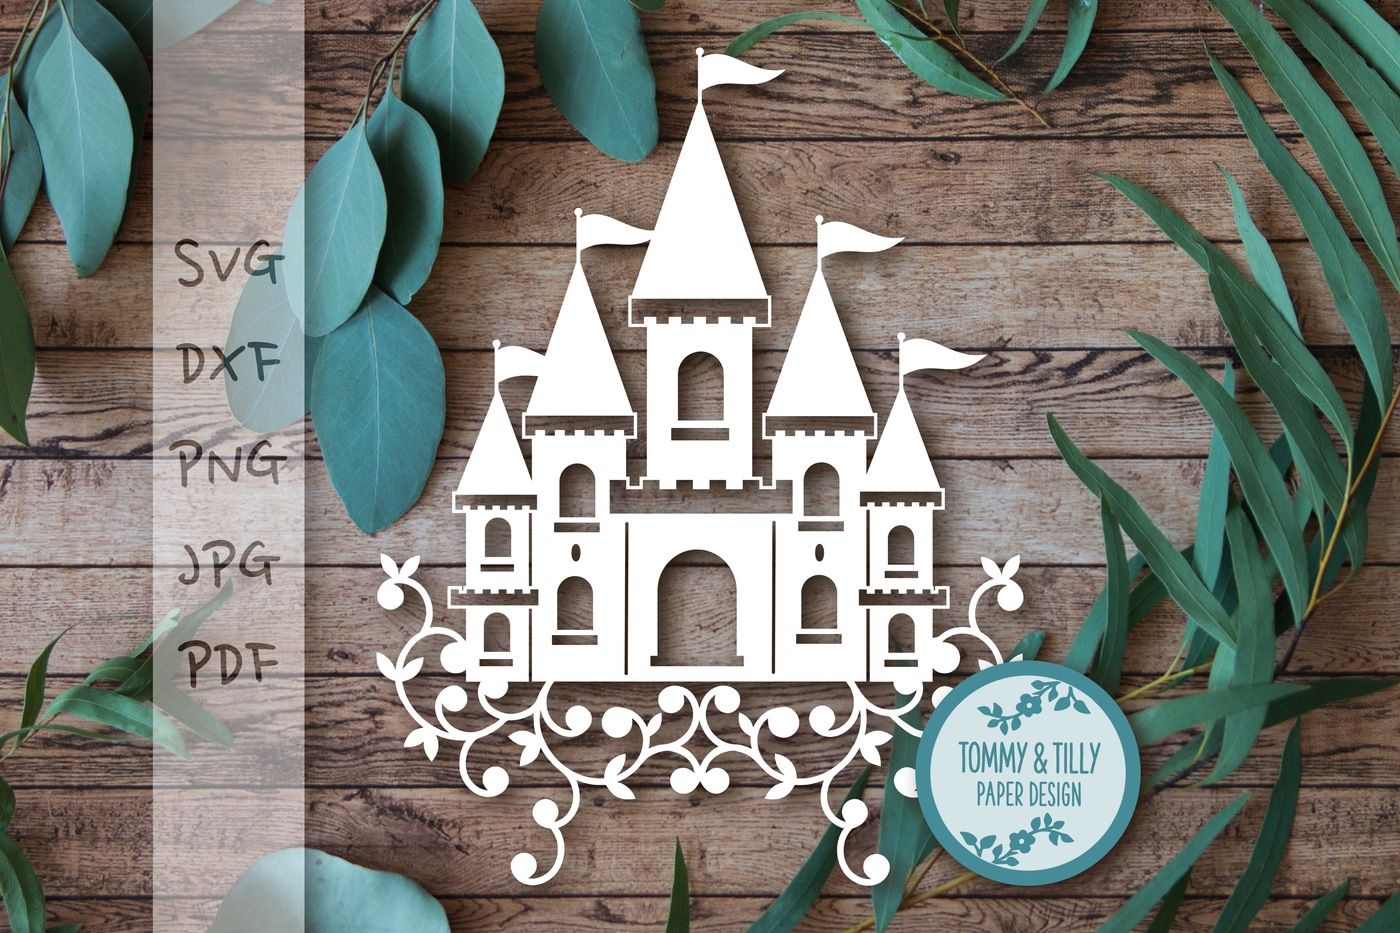 Download Princess Castle Svg Dxf Png Pdf Jpg By Tommy And Tilly Design Thehungryjpeg Com